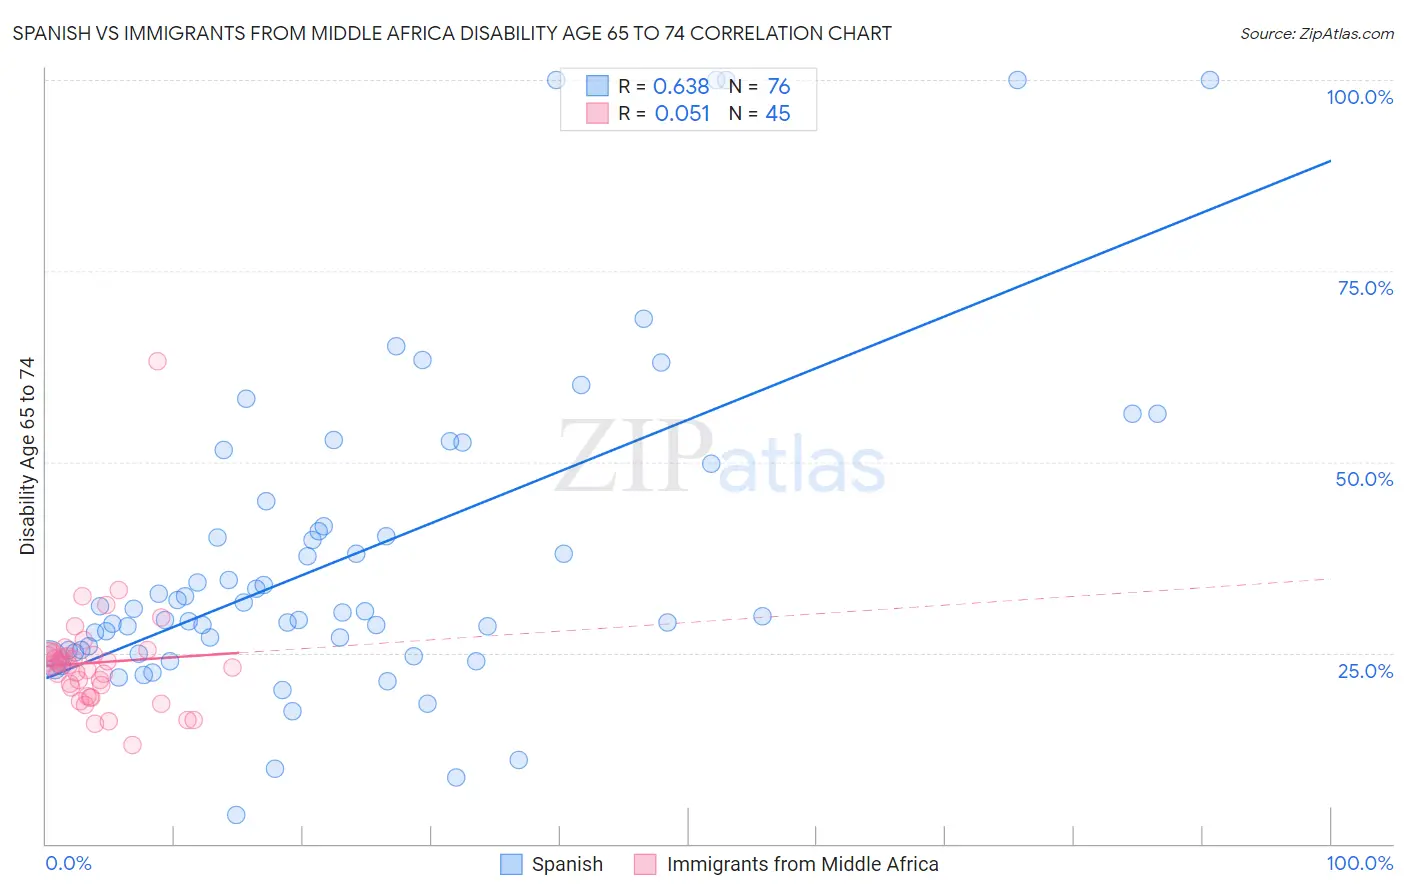 Spanish vs Immigrants from Middle Africa Disability Age 65 to 74